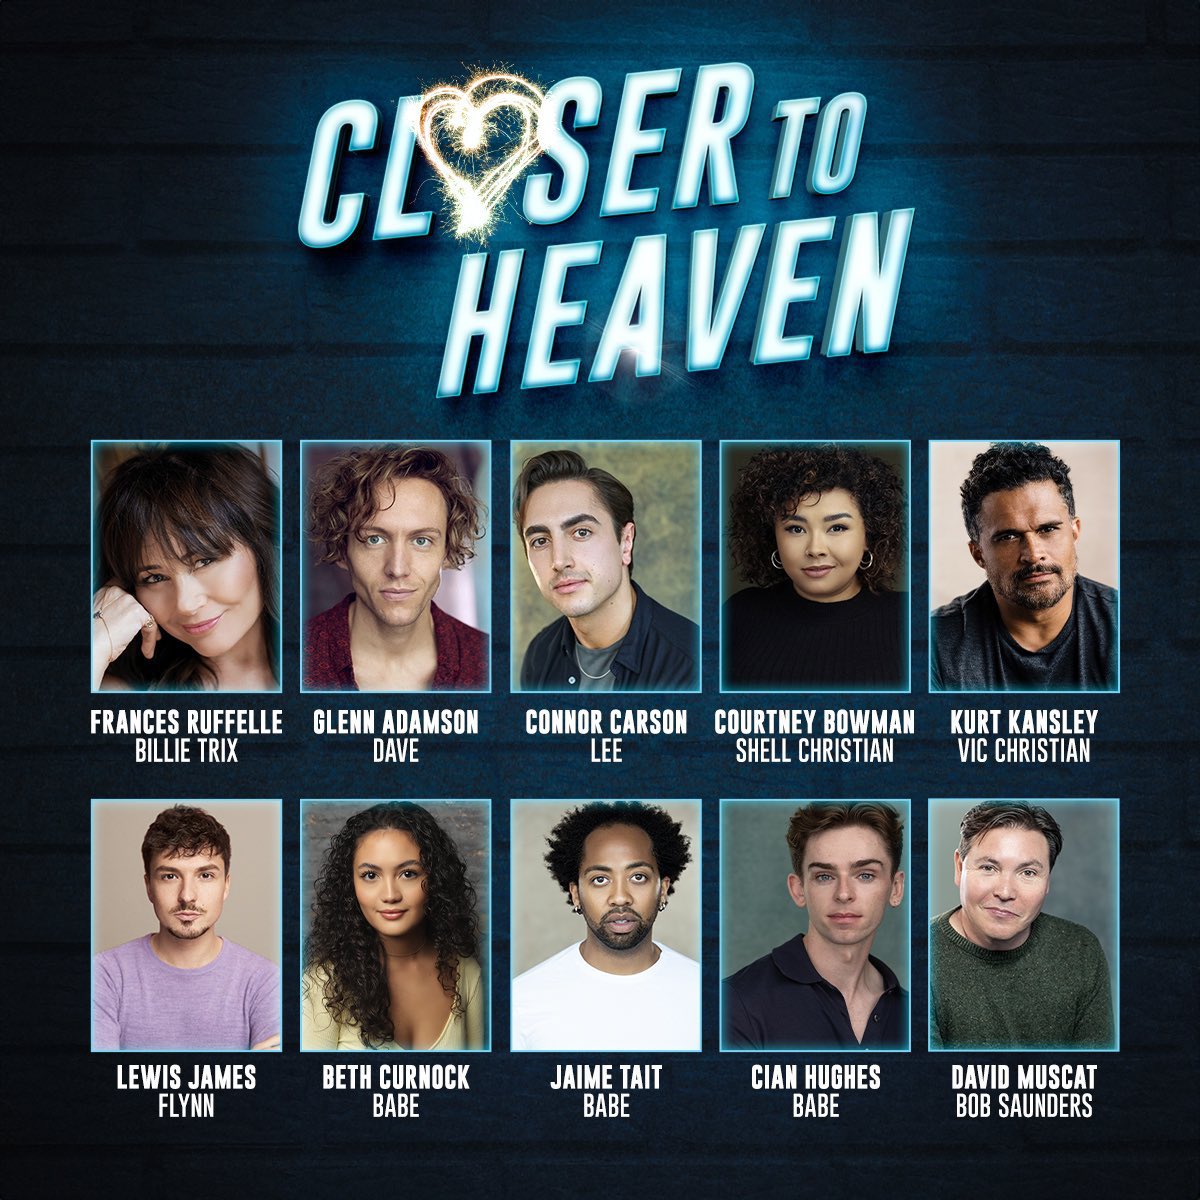 The cast of the new London production of “Closer to Heaven” has just been announced. Full details and ticket information at the link below. theturbinetheatre.com/whats-on/close… #PetText